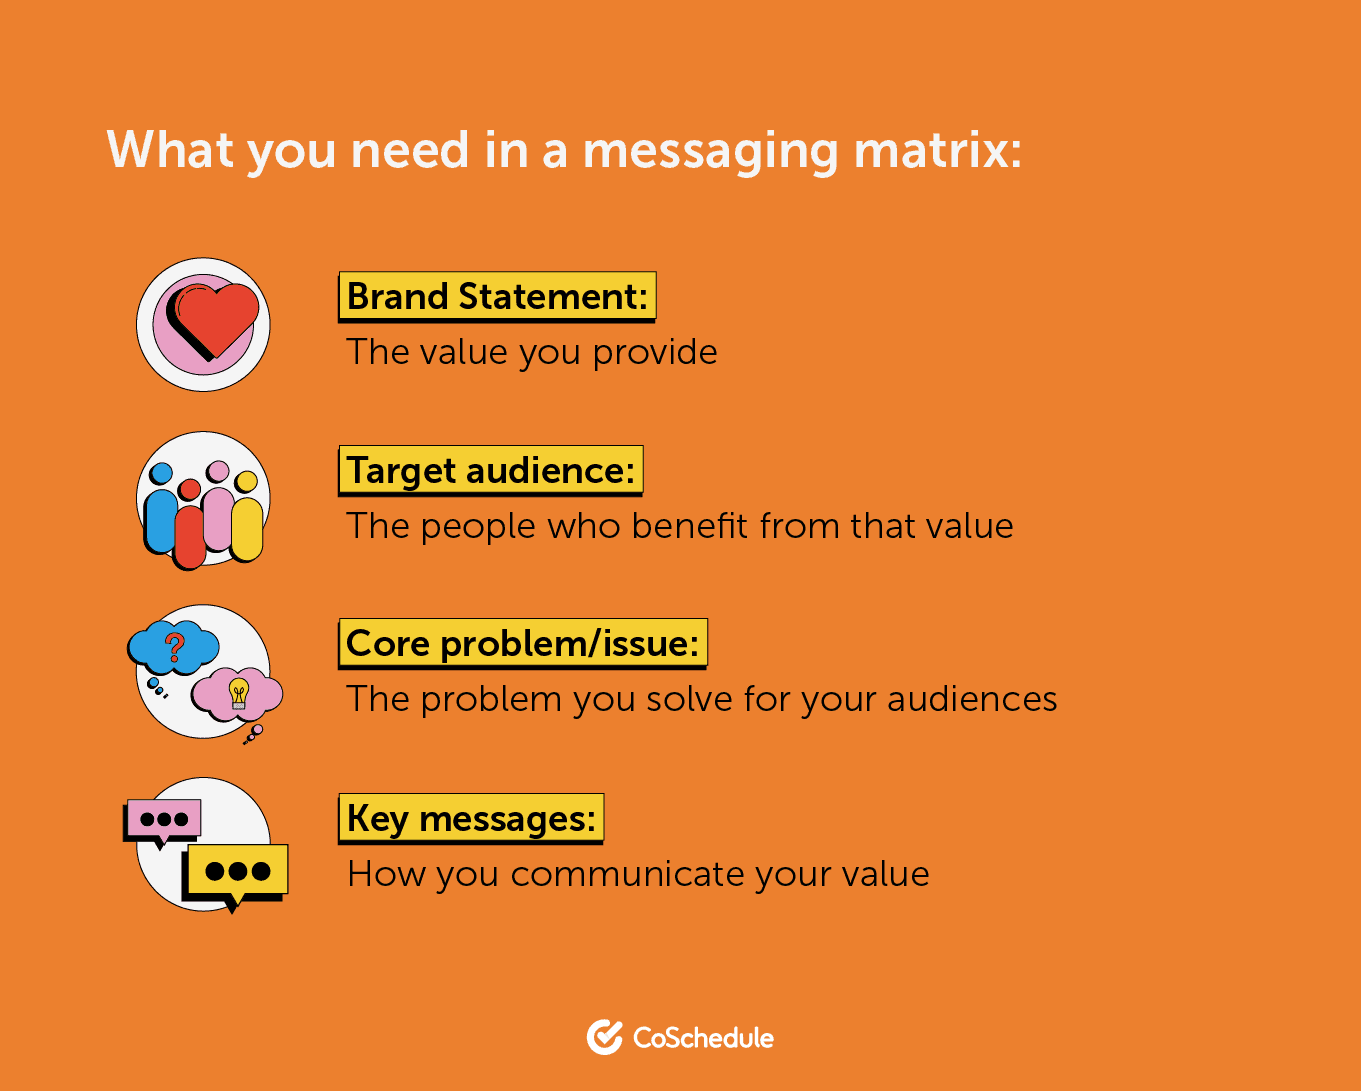 What you need in a messaging matrix